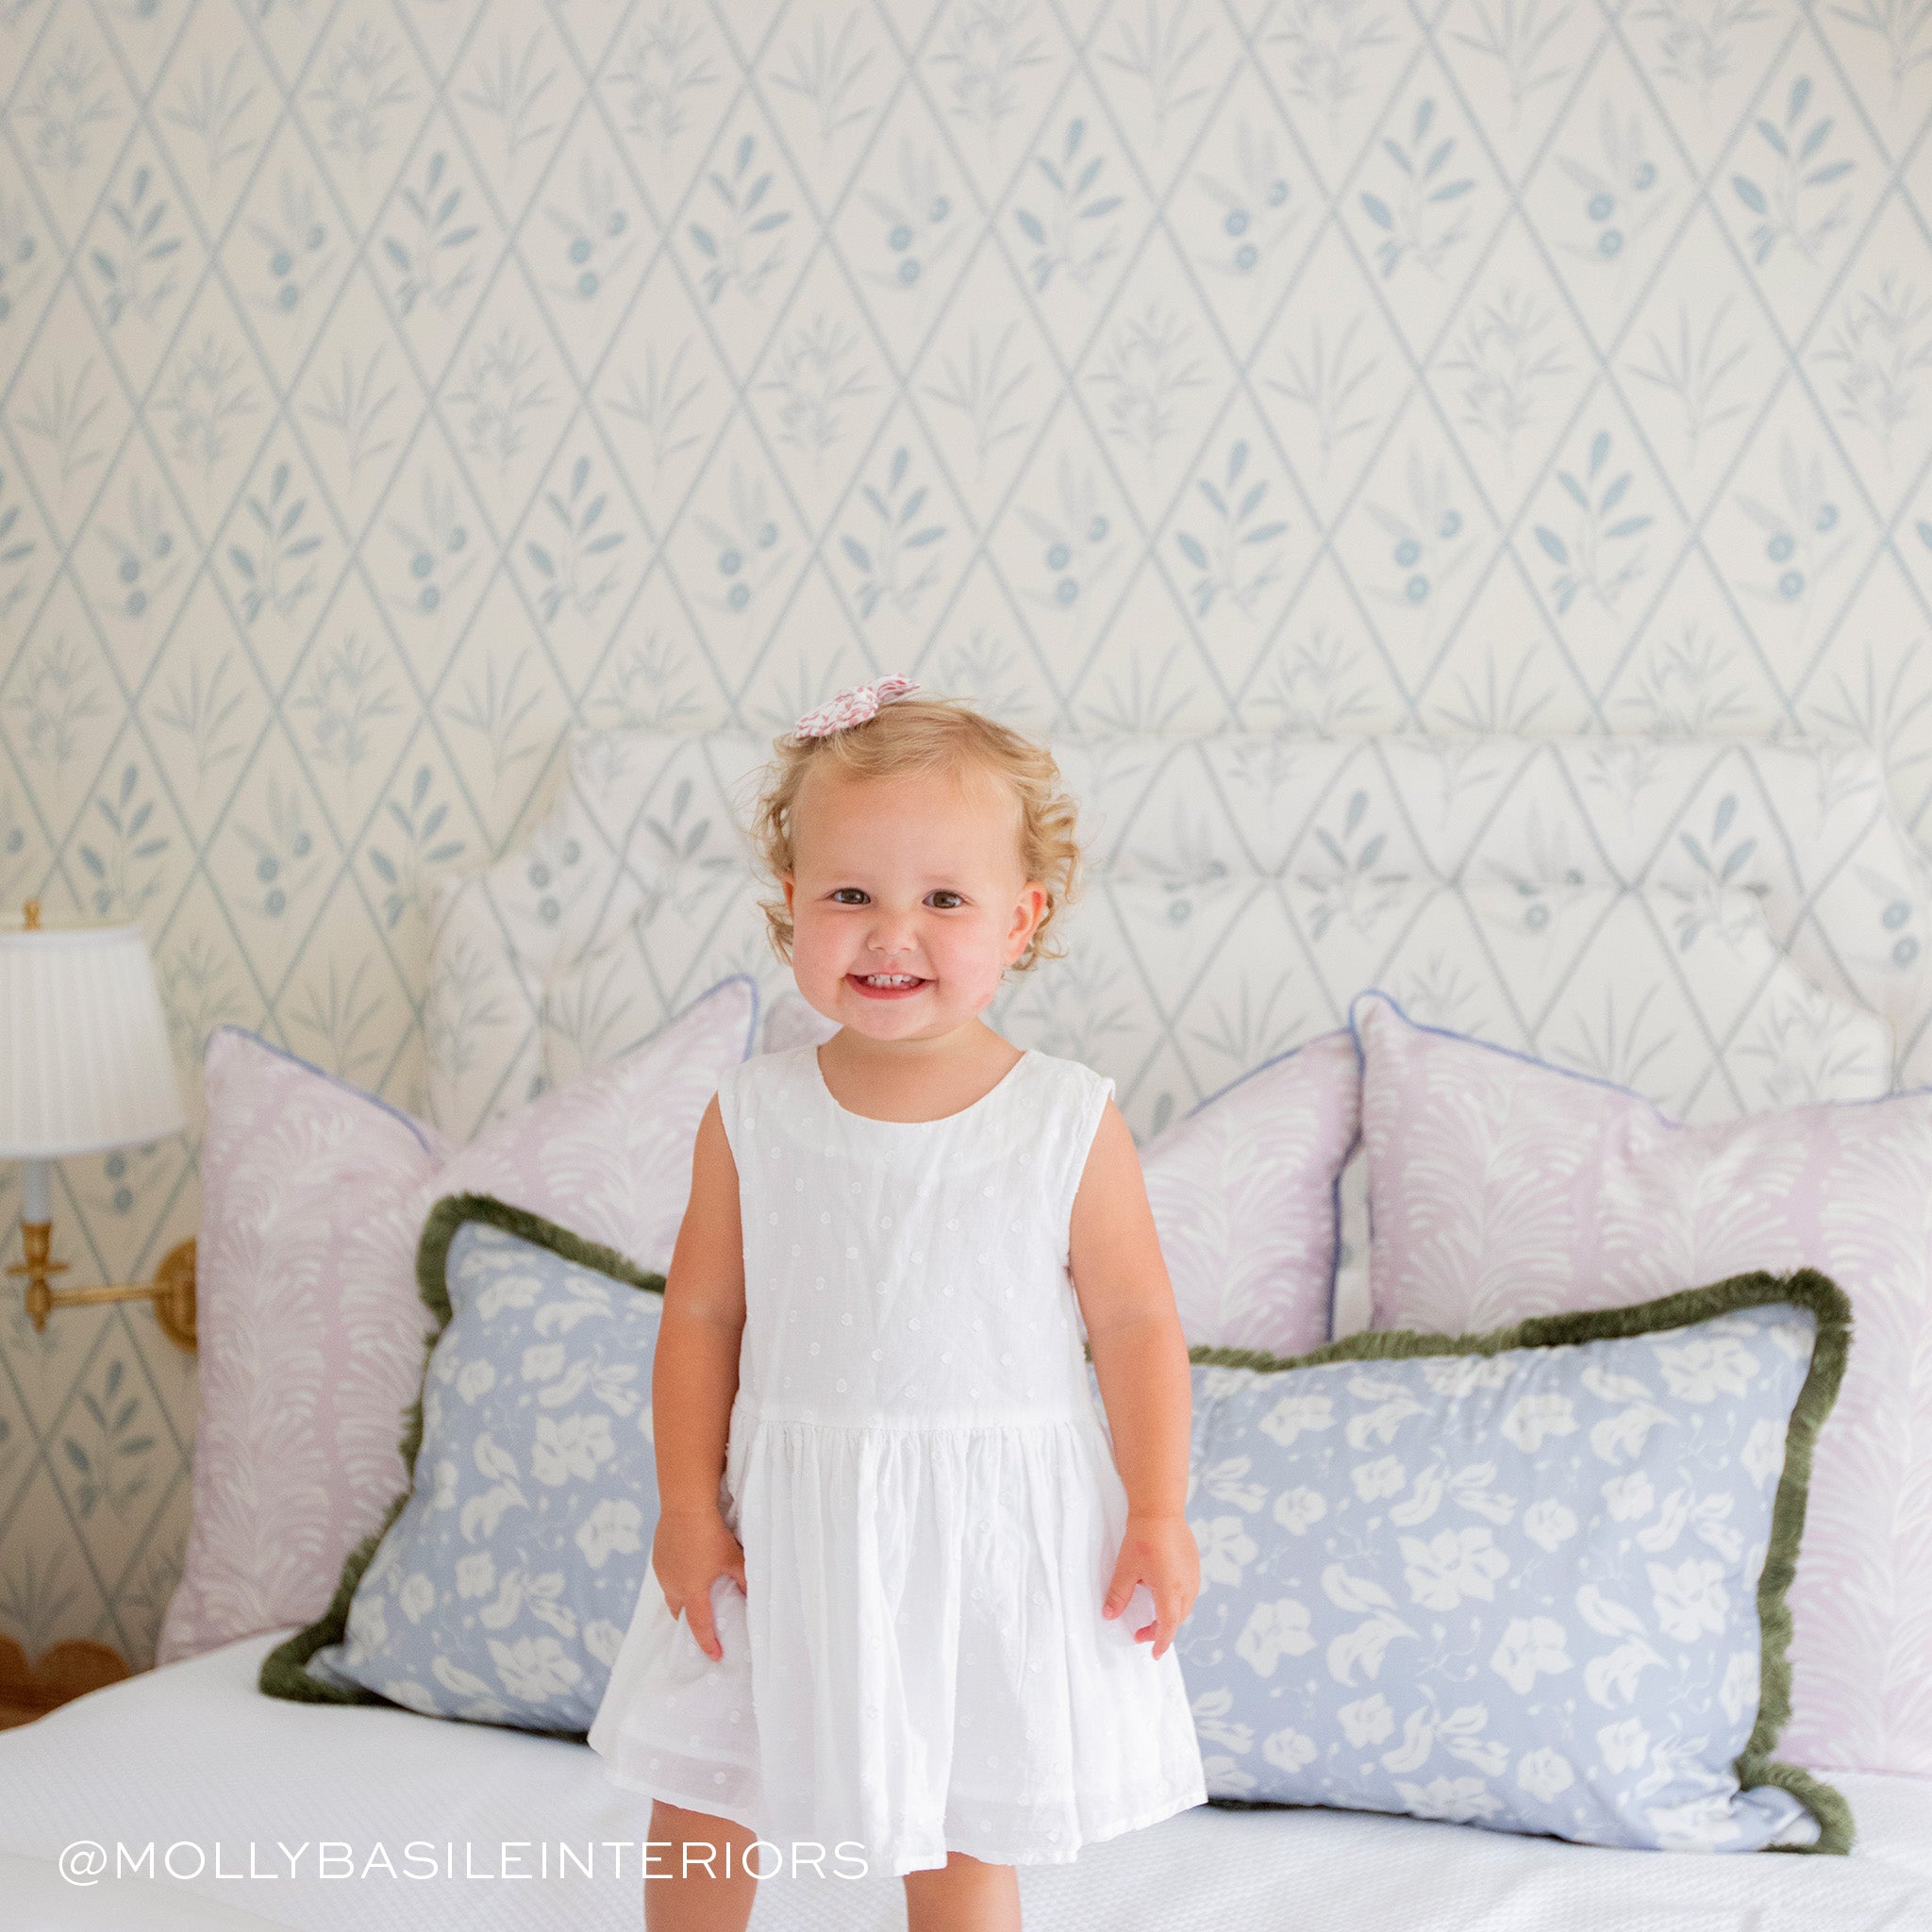 Bed styled with three Lavender Botanical Stripe Printed Pillows and one blue floral printed lumbar with sage fringe on white sheets with baby with a white dress and bow on the hair. Photo taken by Molly Basile